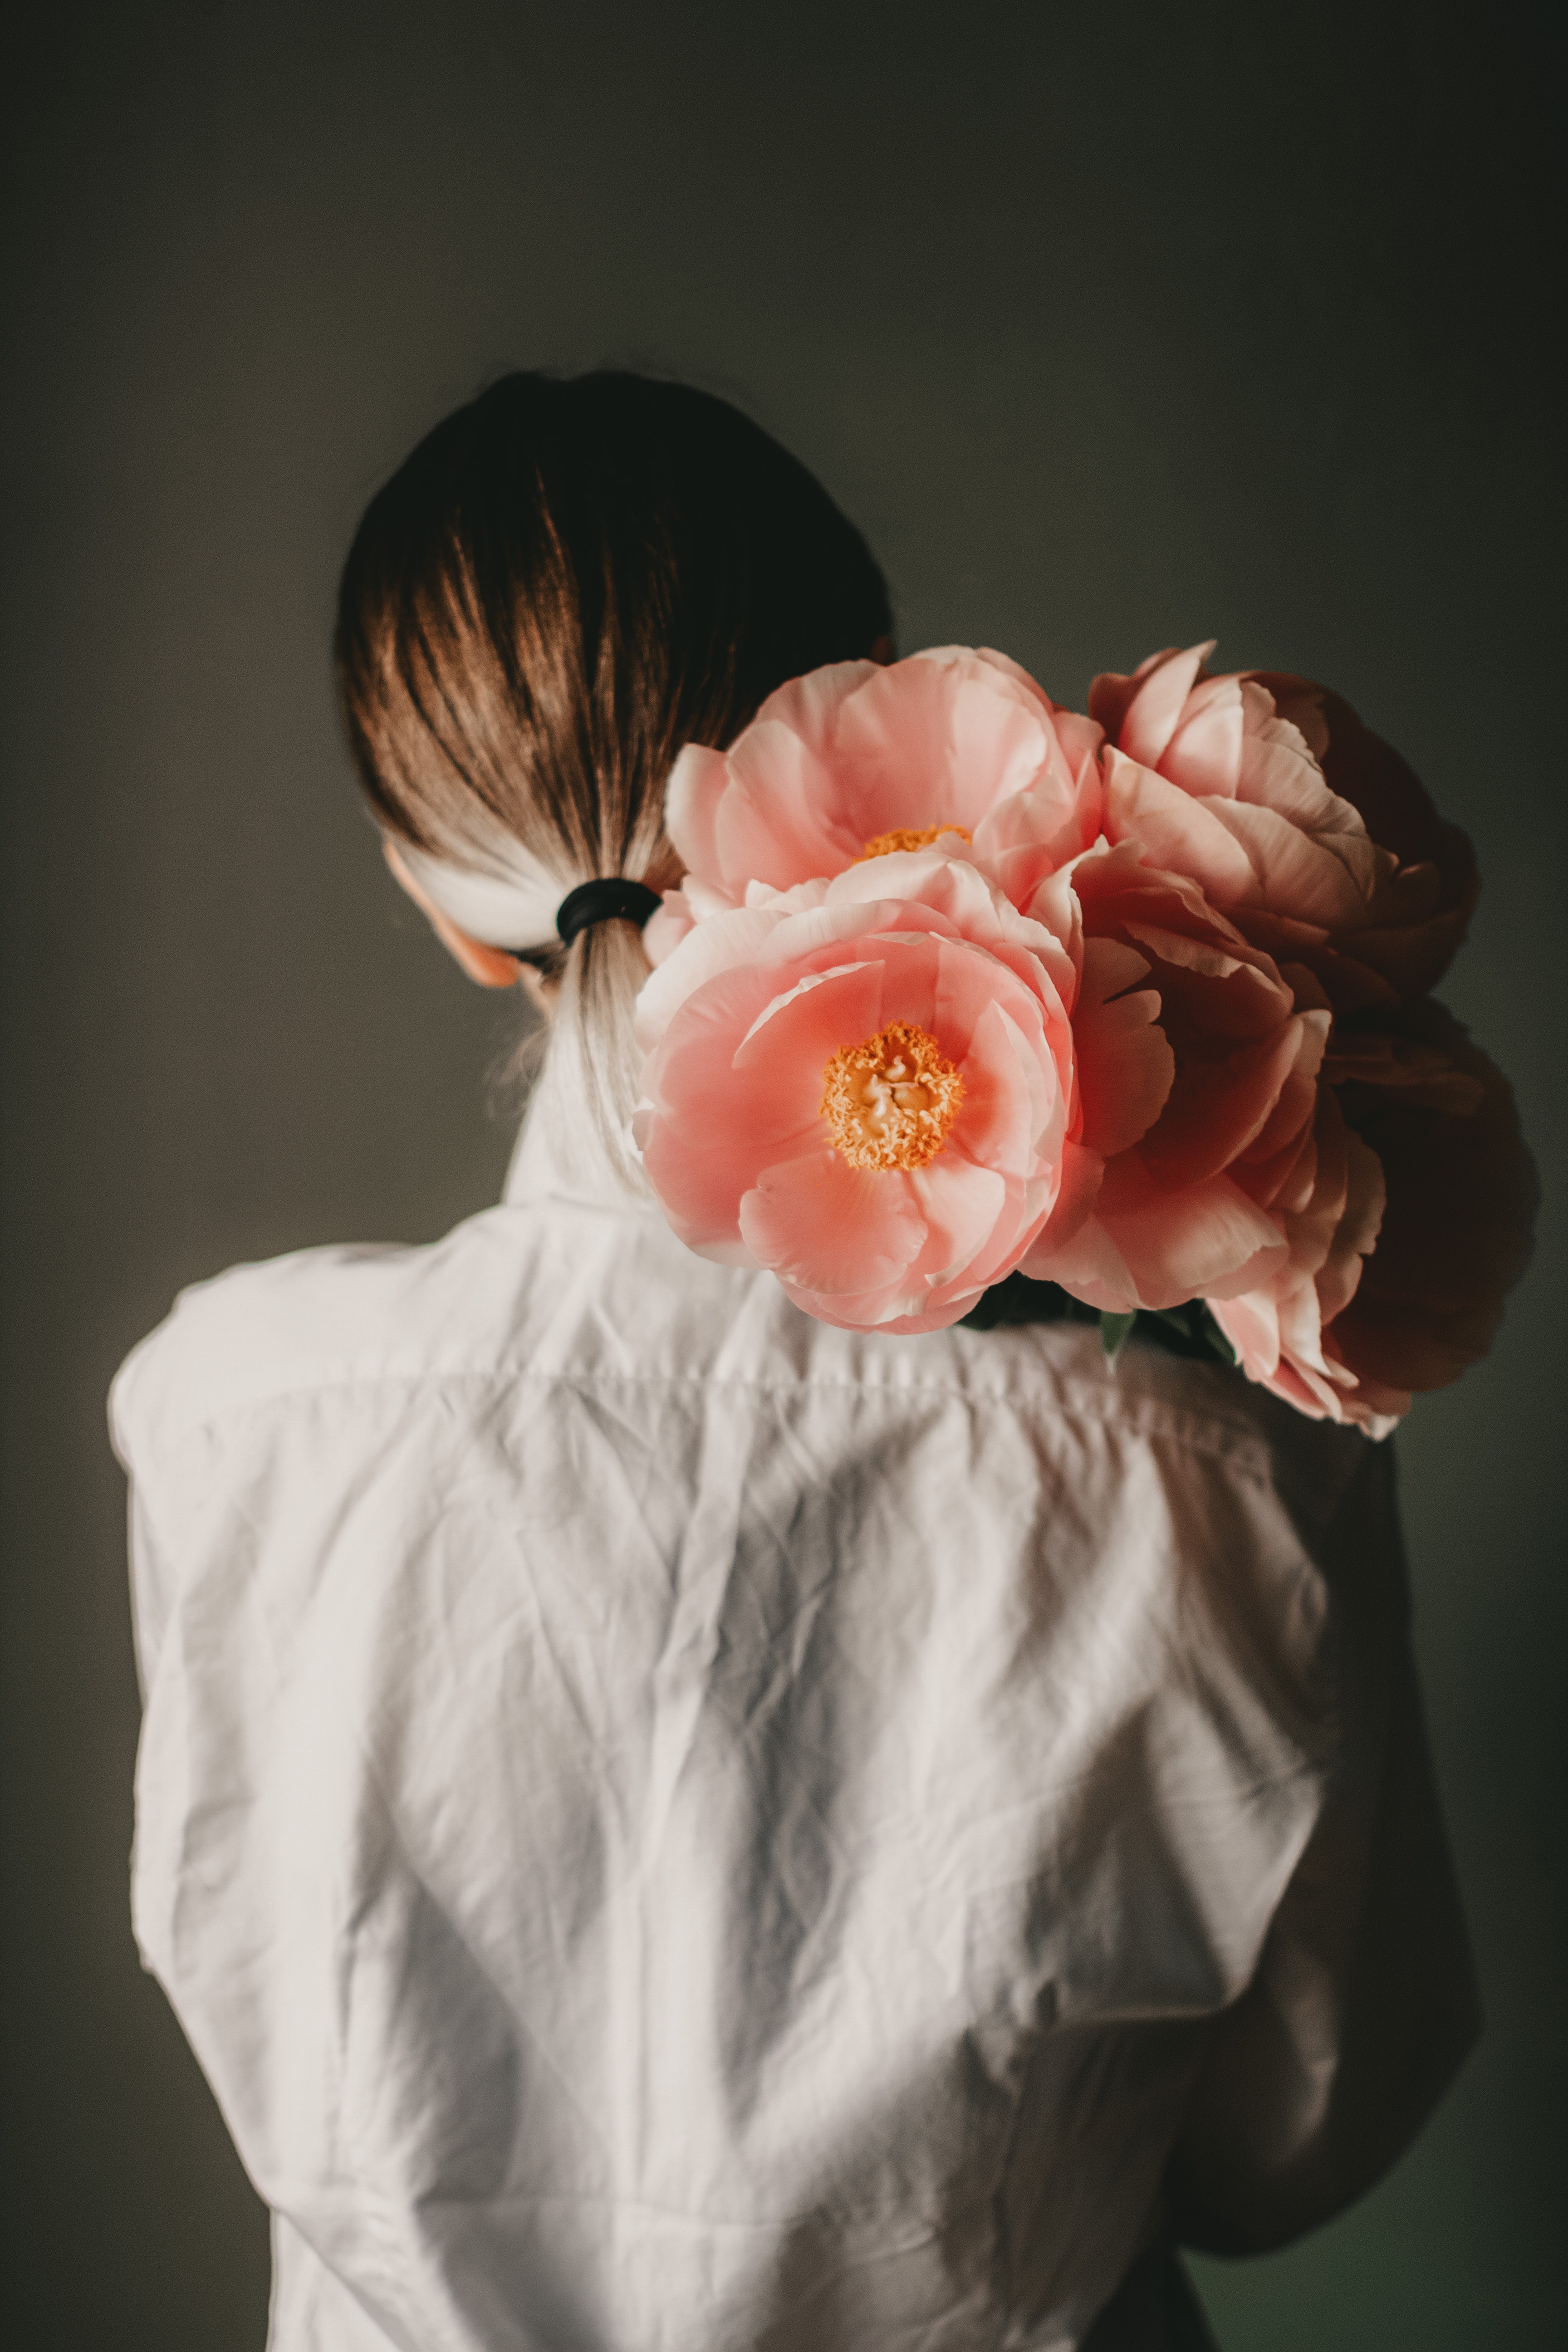 A woman with flowers. | Source: Pexels